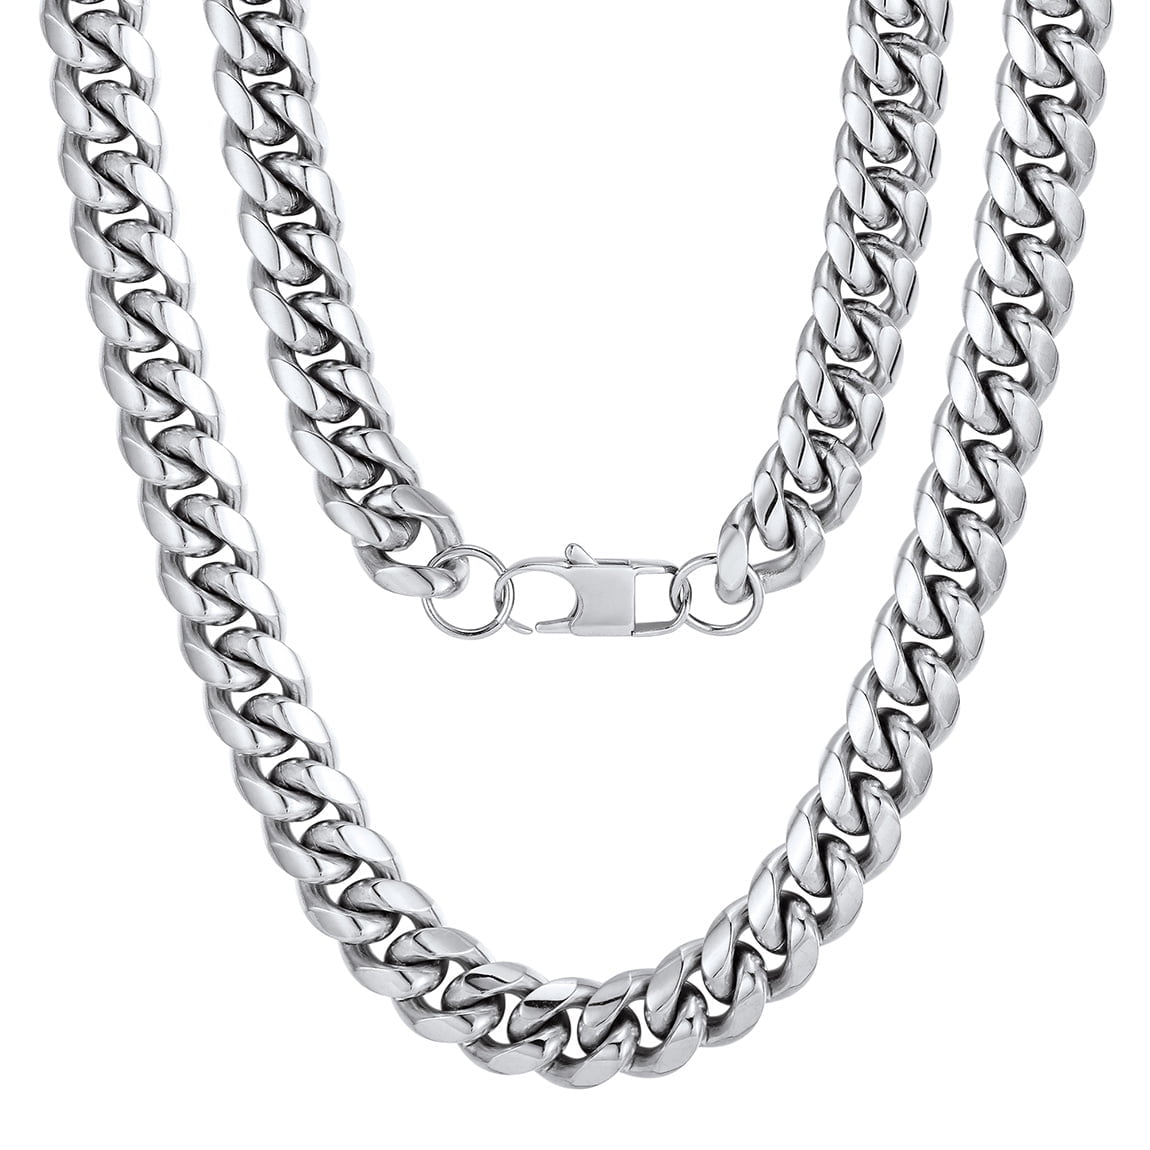 ChainsProMax Mens Silver Chain Stainless Steel 20inch 14MM Strong ...